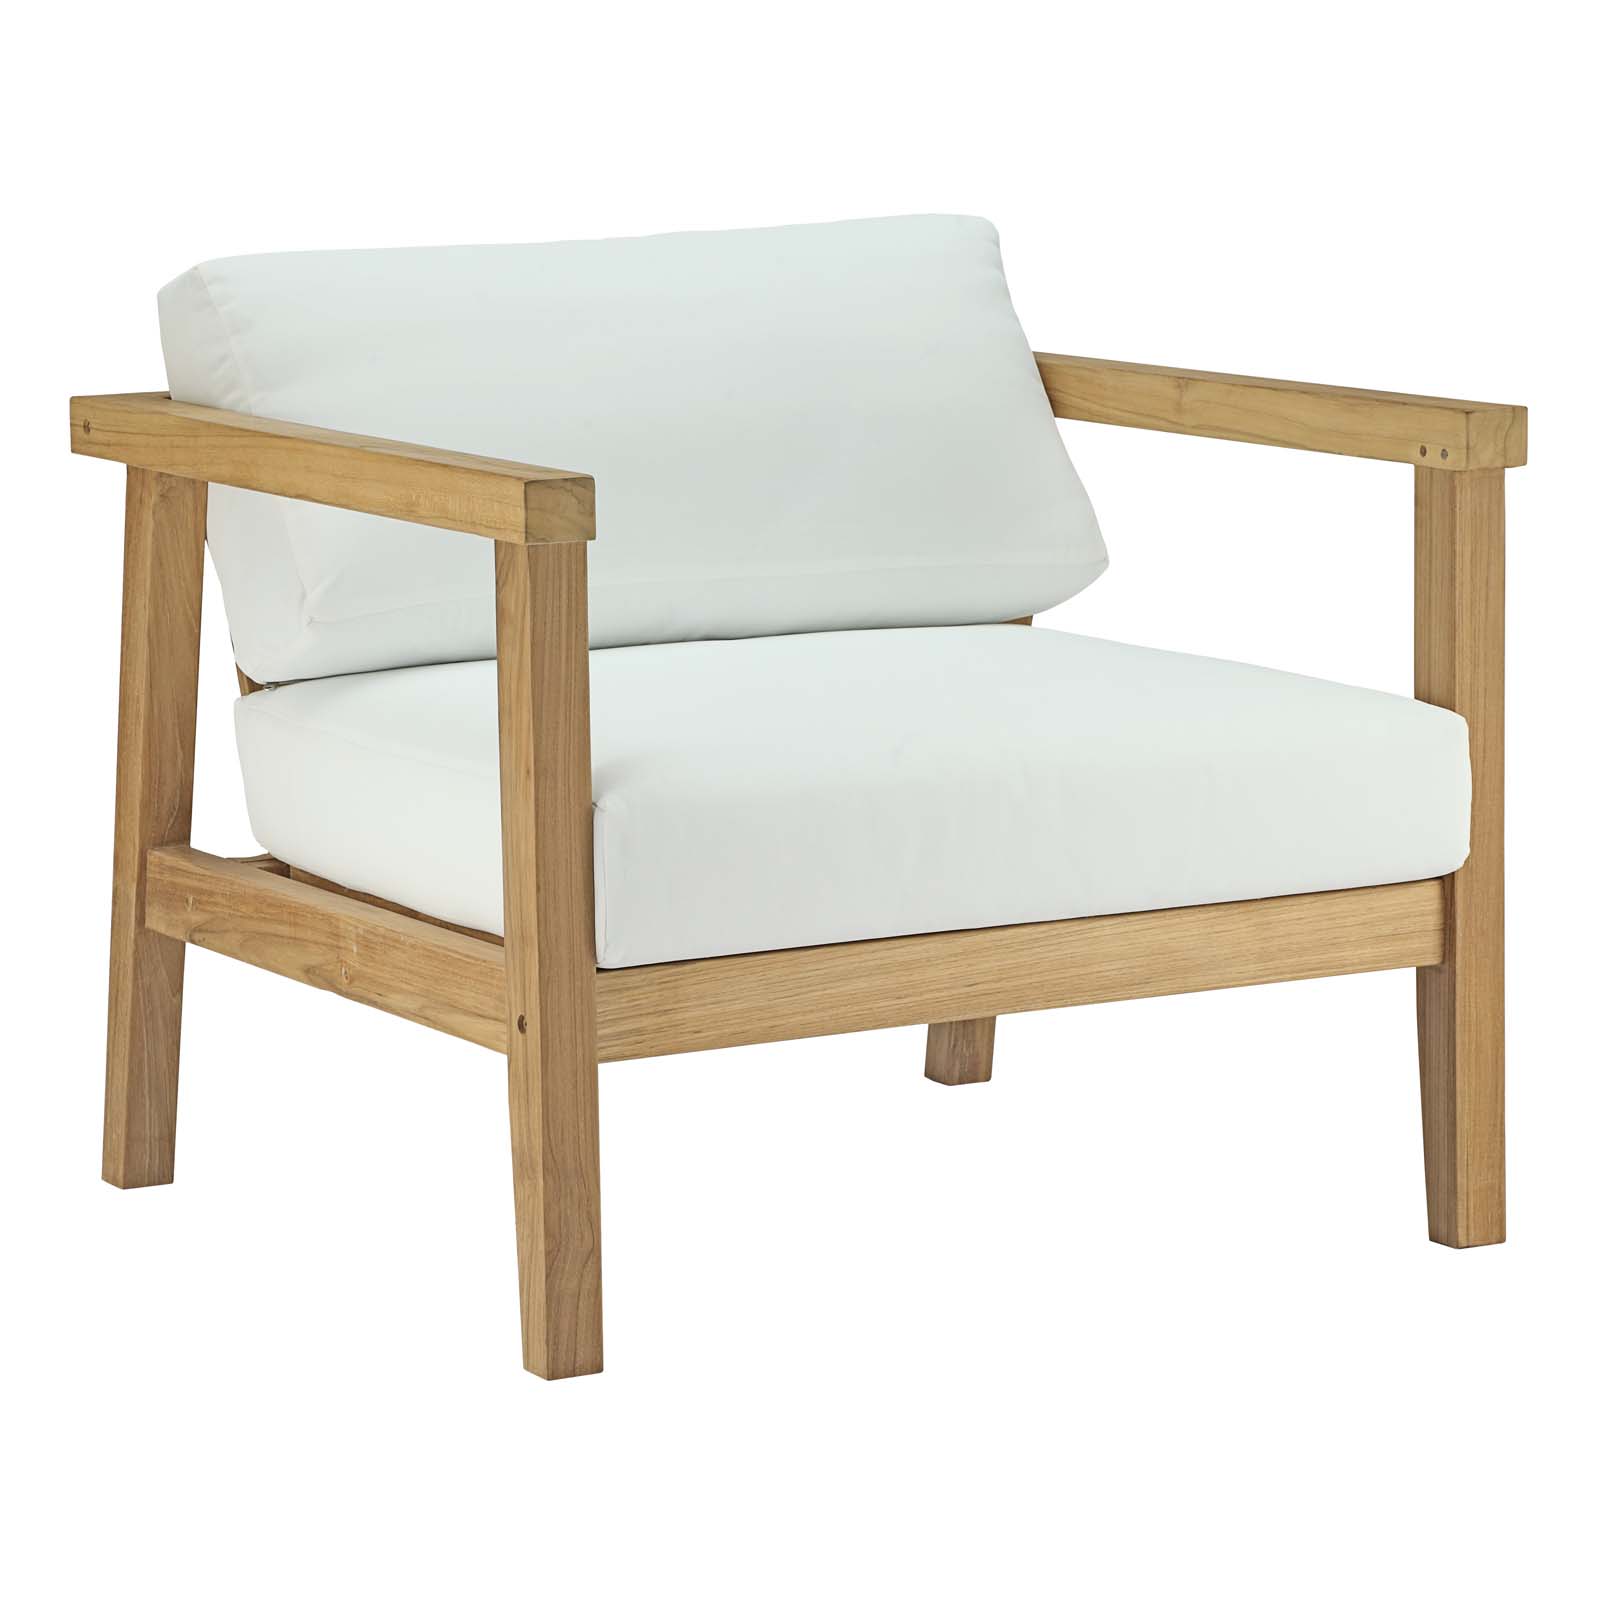 Modway Bayport Outdoor Patio Teak Armchair in Natural White - image 3 of 6